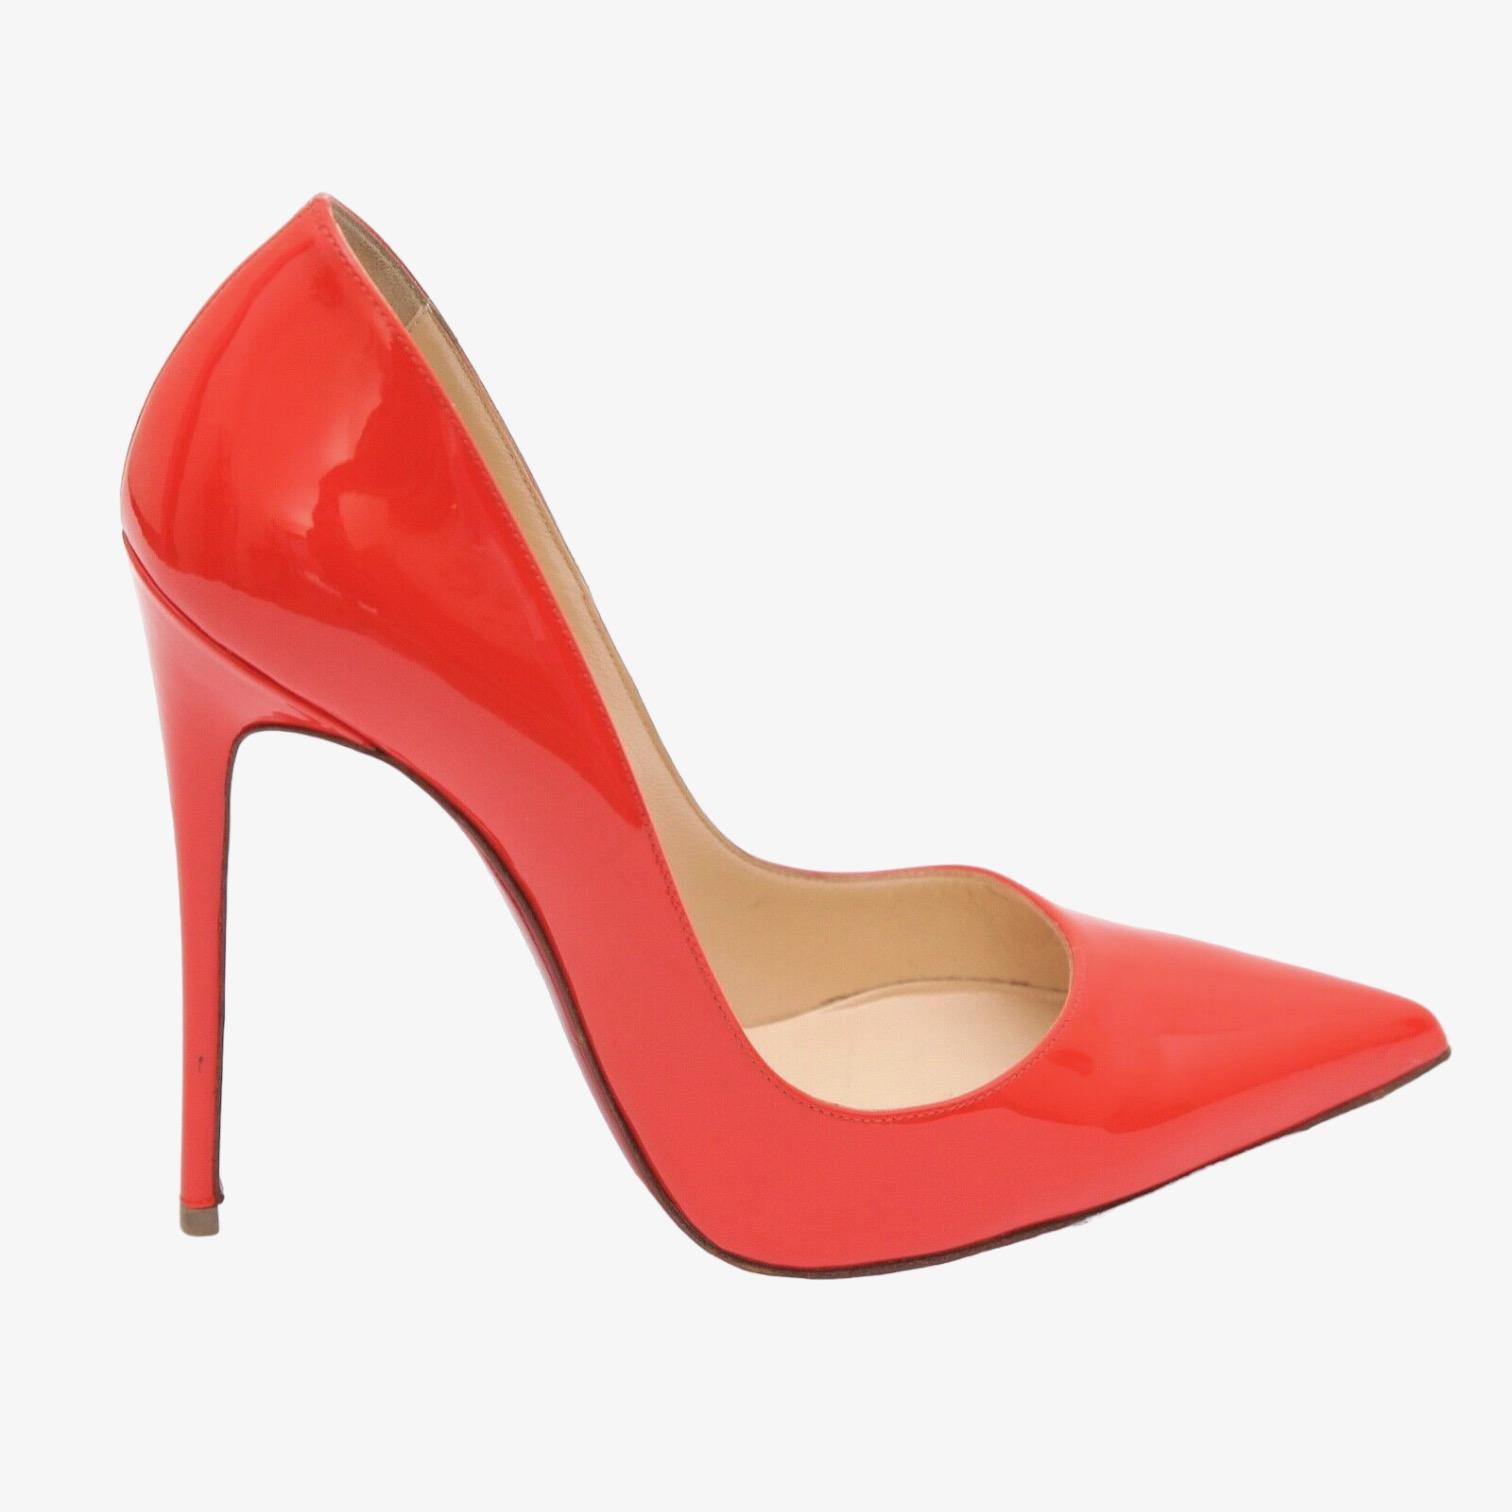 GUARANTEED AUTHENTIC CHRISTIAN LOUBOUTIN ORANGE PATENT LEATHER SO KATE 120 PUMPS

Design:
- Orange patent leather classic So Kate 120mm pointed toe pump.
- Self-covered heel.
- Leather lining.
- Signature red leather sole.
- Comes with Christian